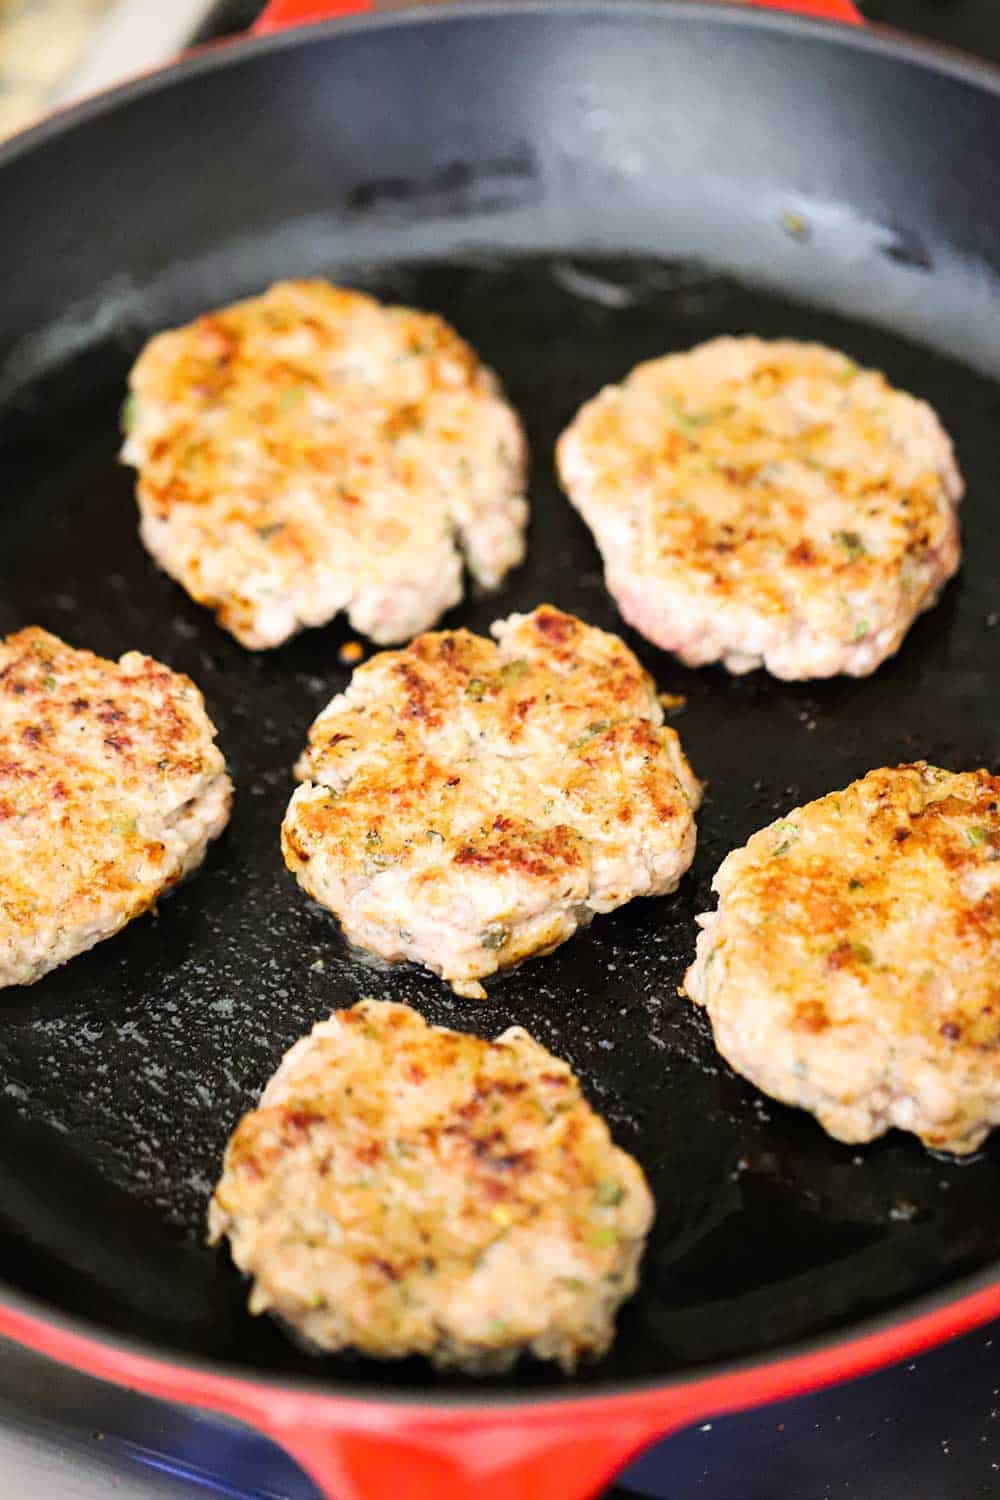 A large black skillet with orange exterior filled with 5 cooked maple sausage patties. 